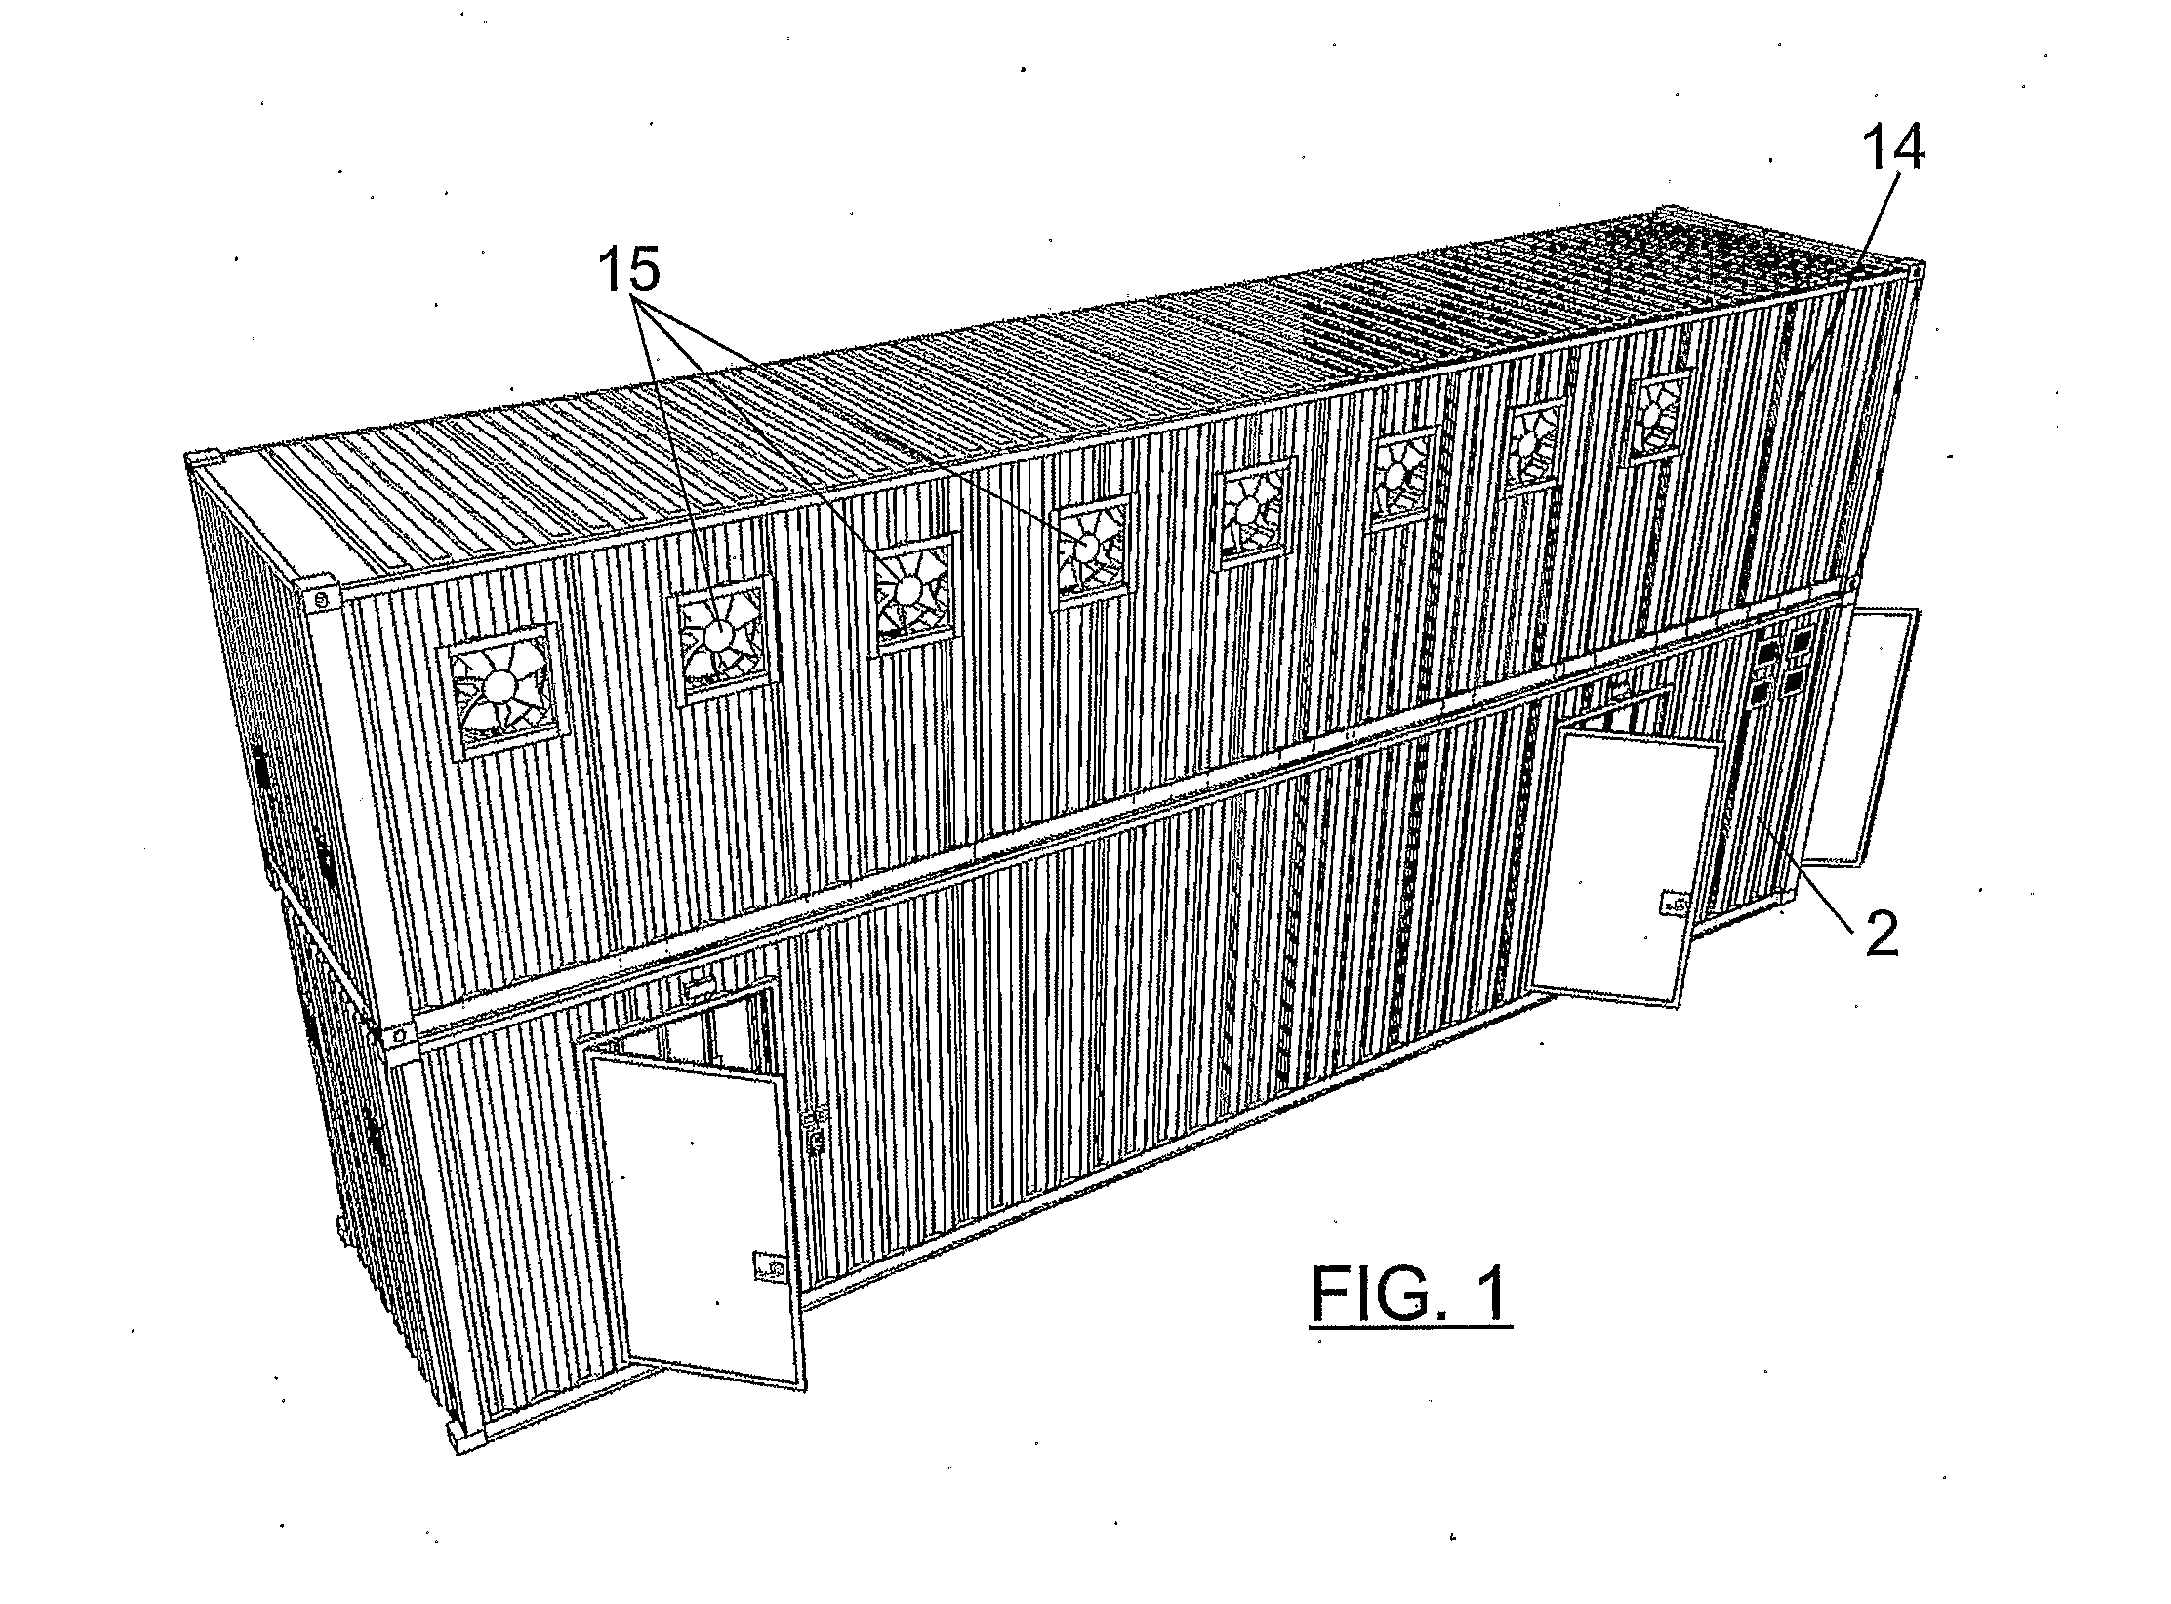 System for air-conditioning the interior of a data processing center